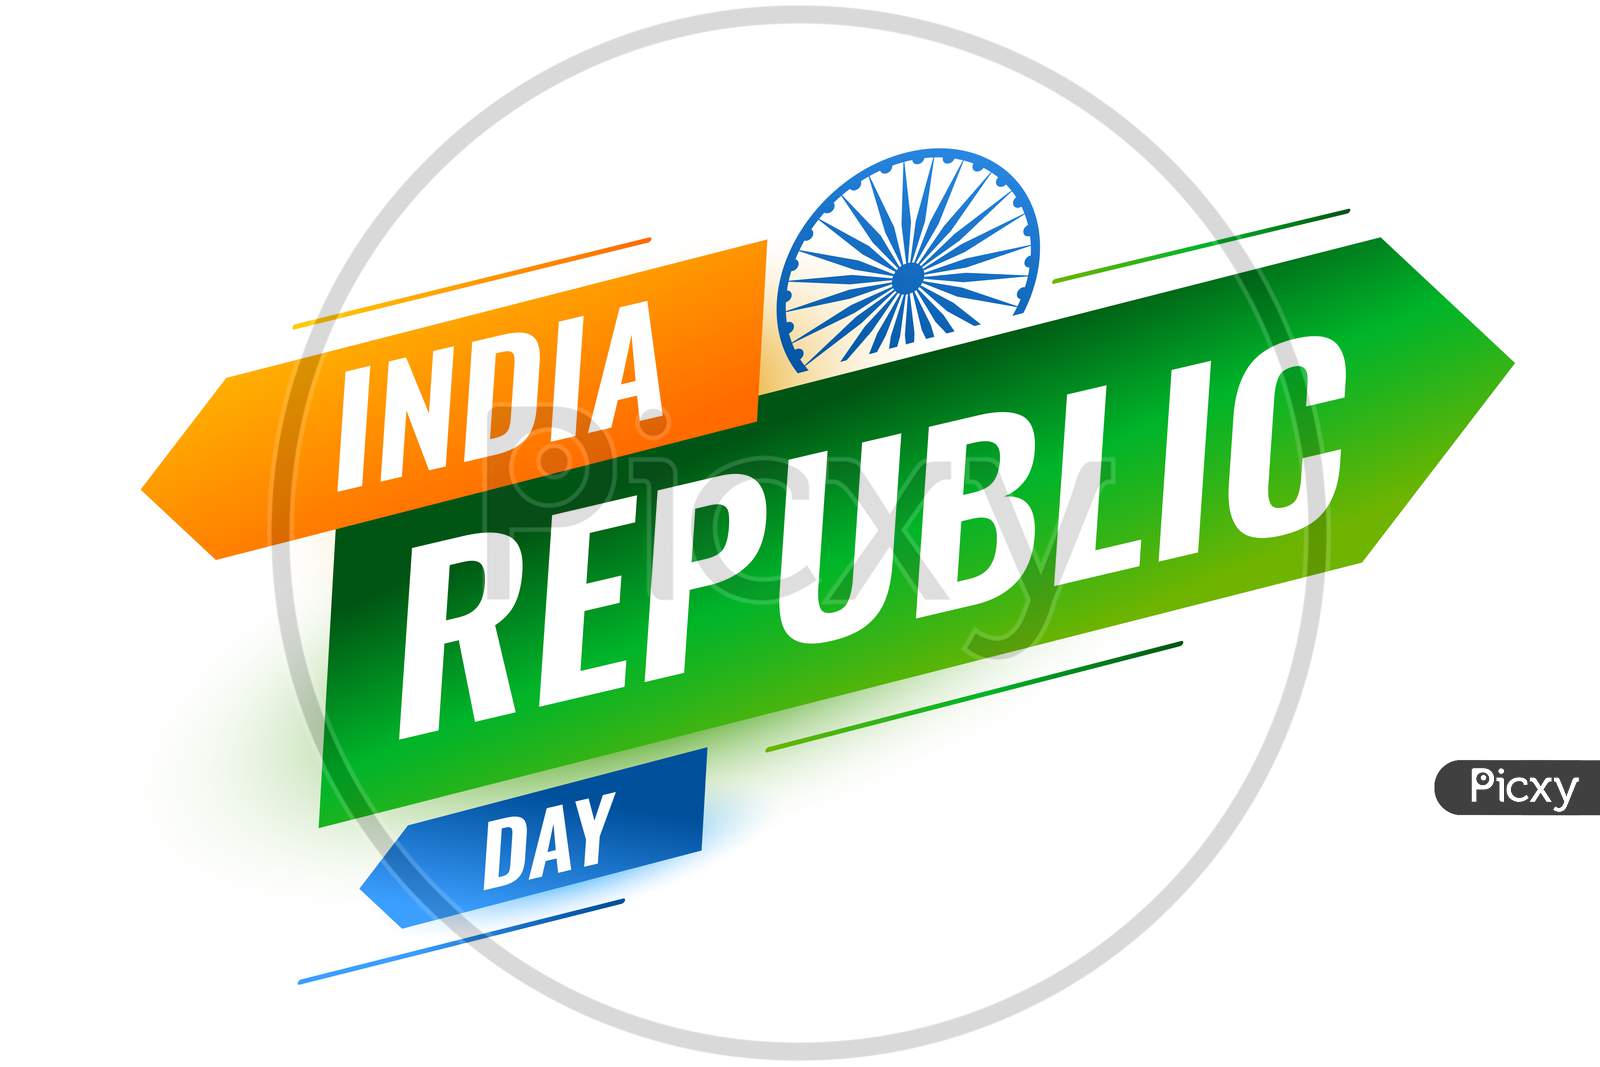 Indian Republic Day